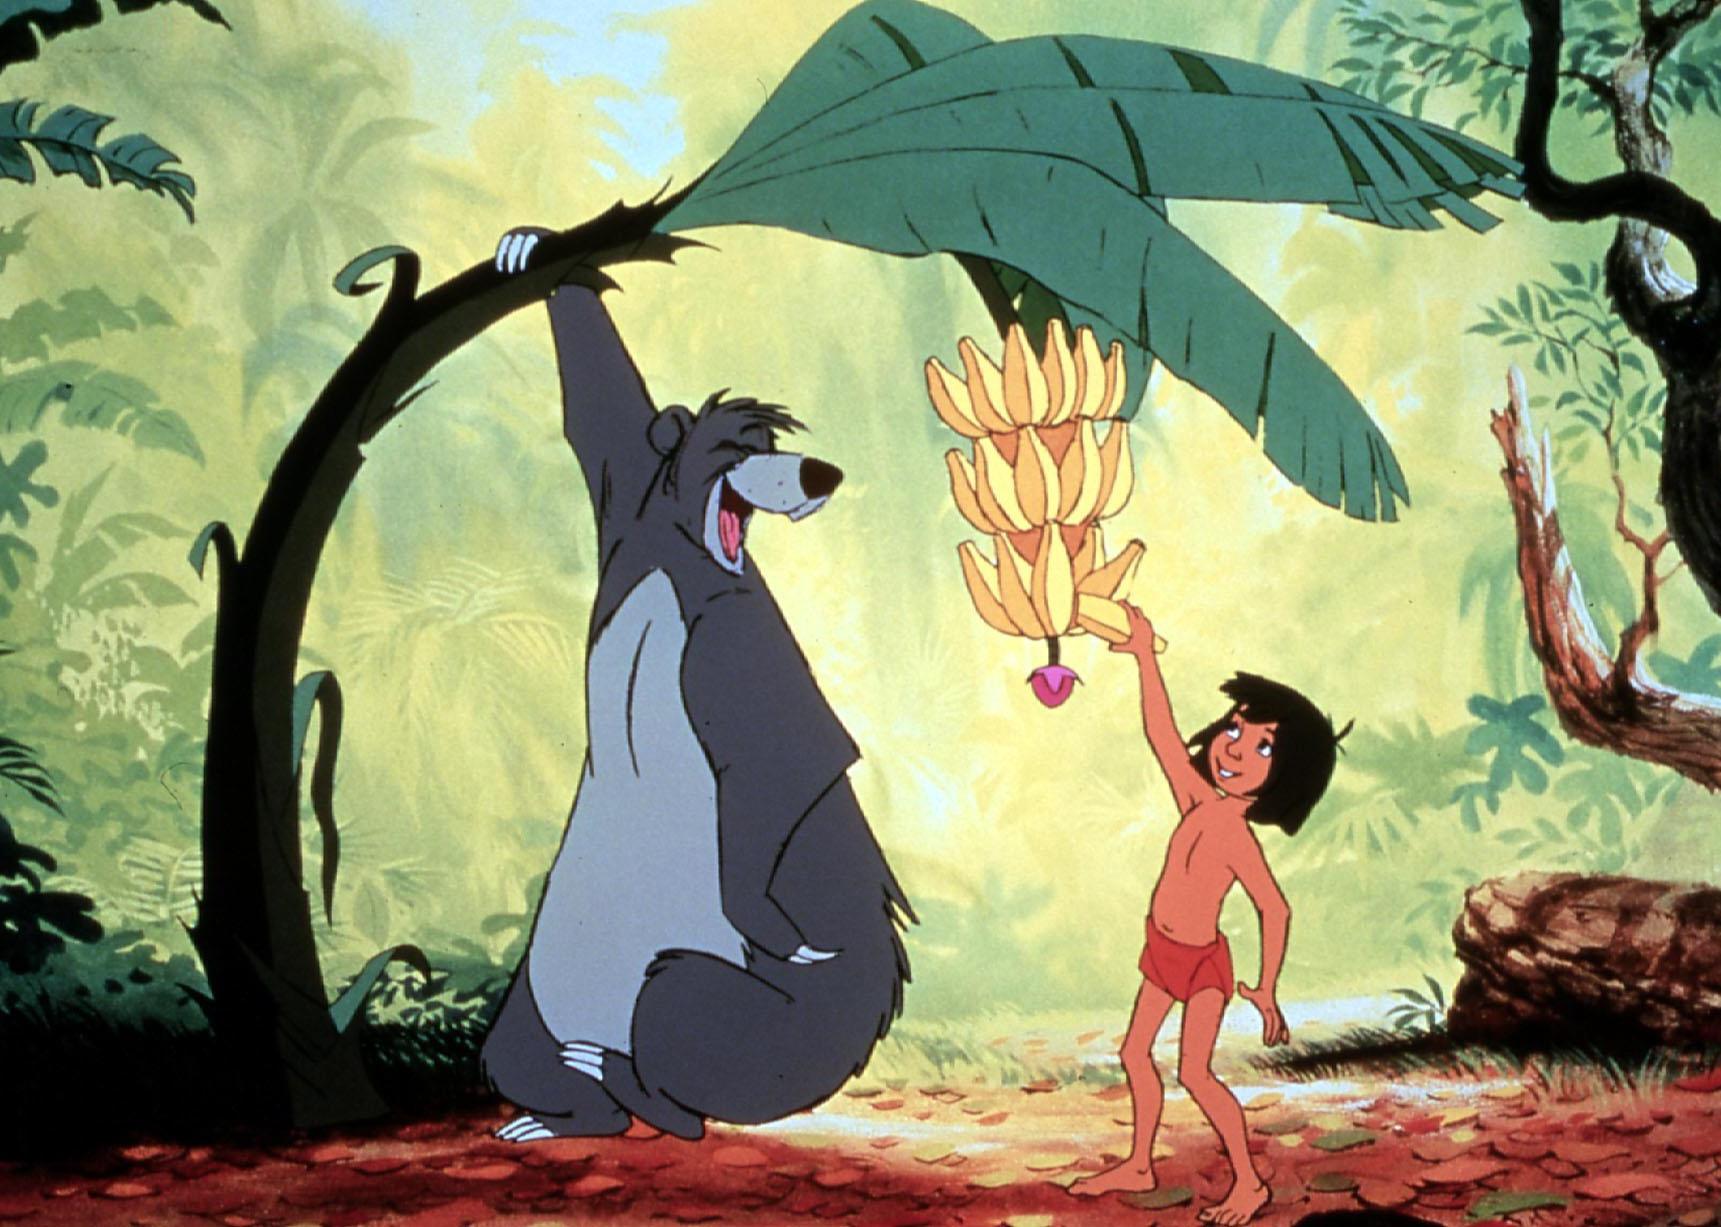 An illustrated scene from The Jungle Book.